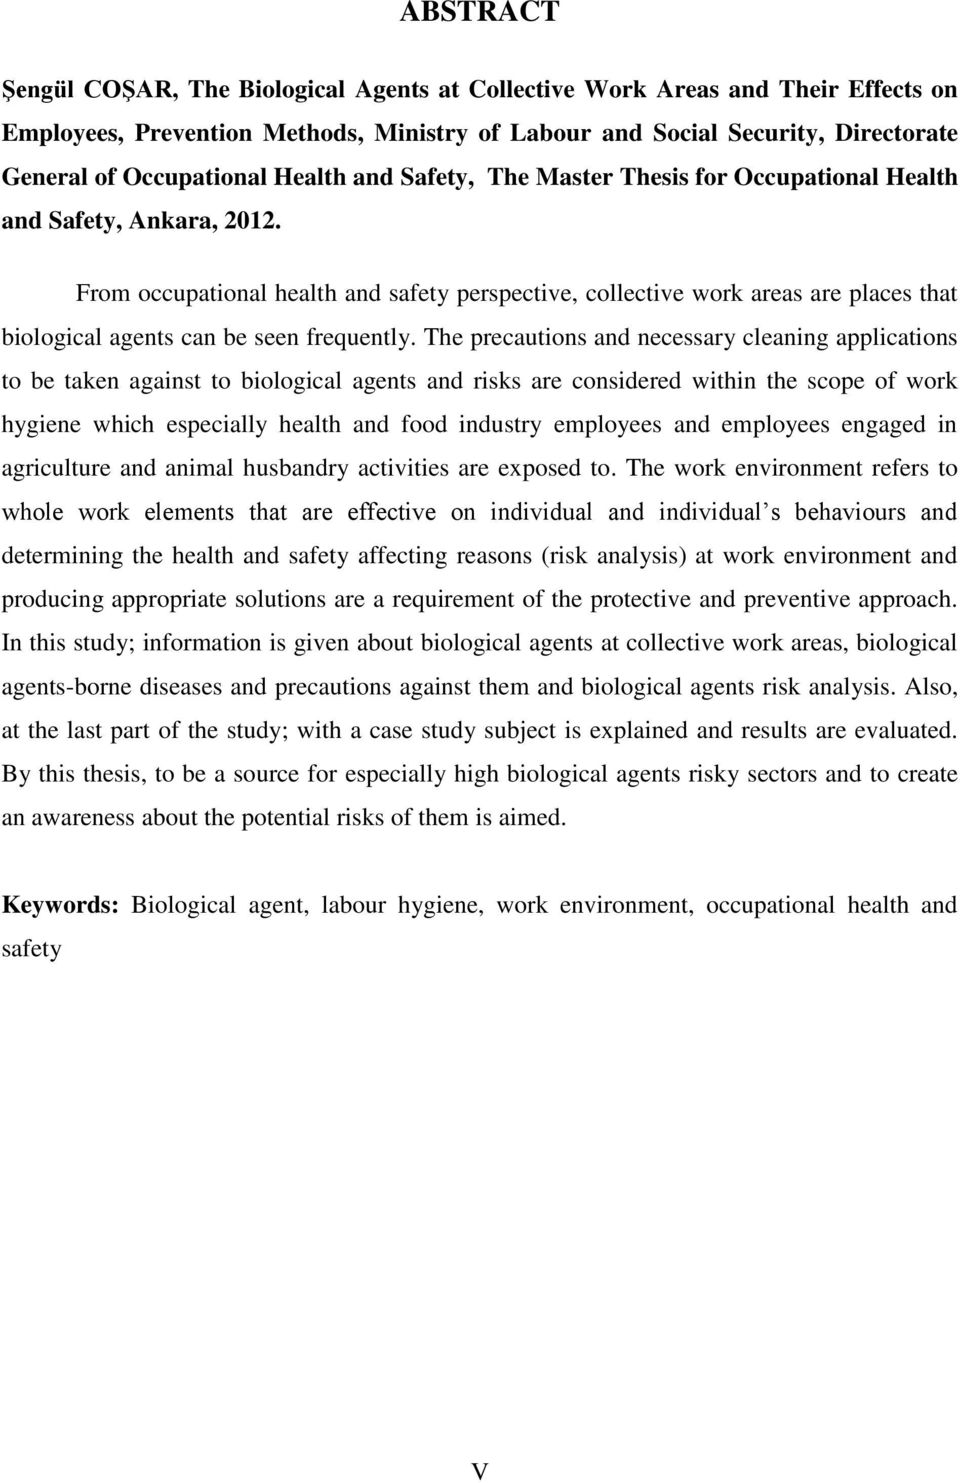 From occupational health and safety perspective, collective work areas are places that biological agents can be seen frequently.